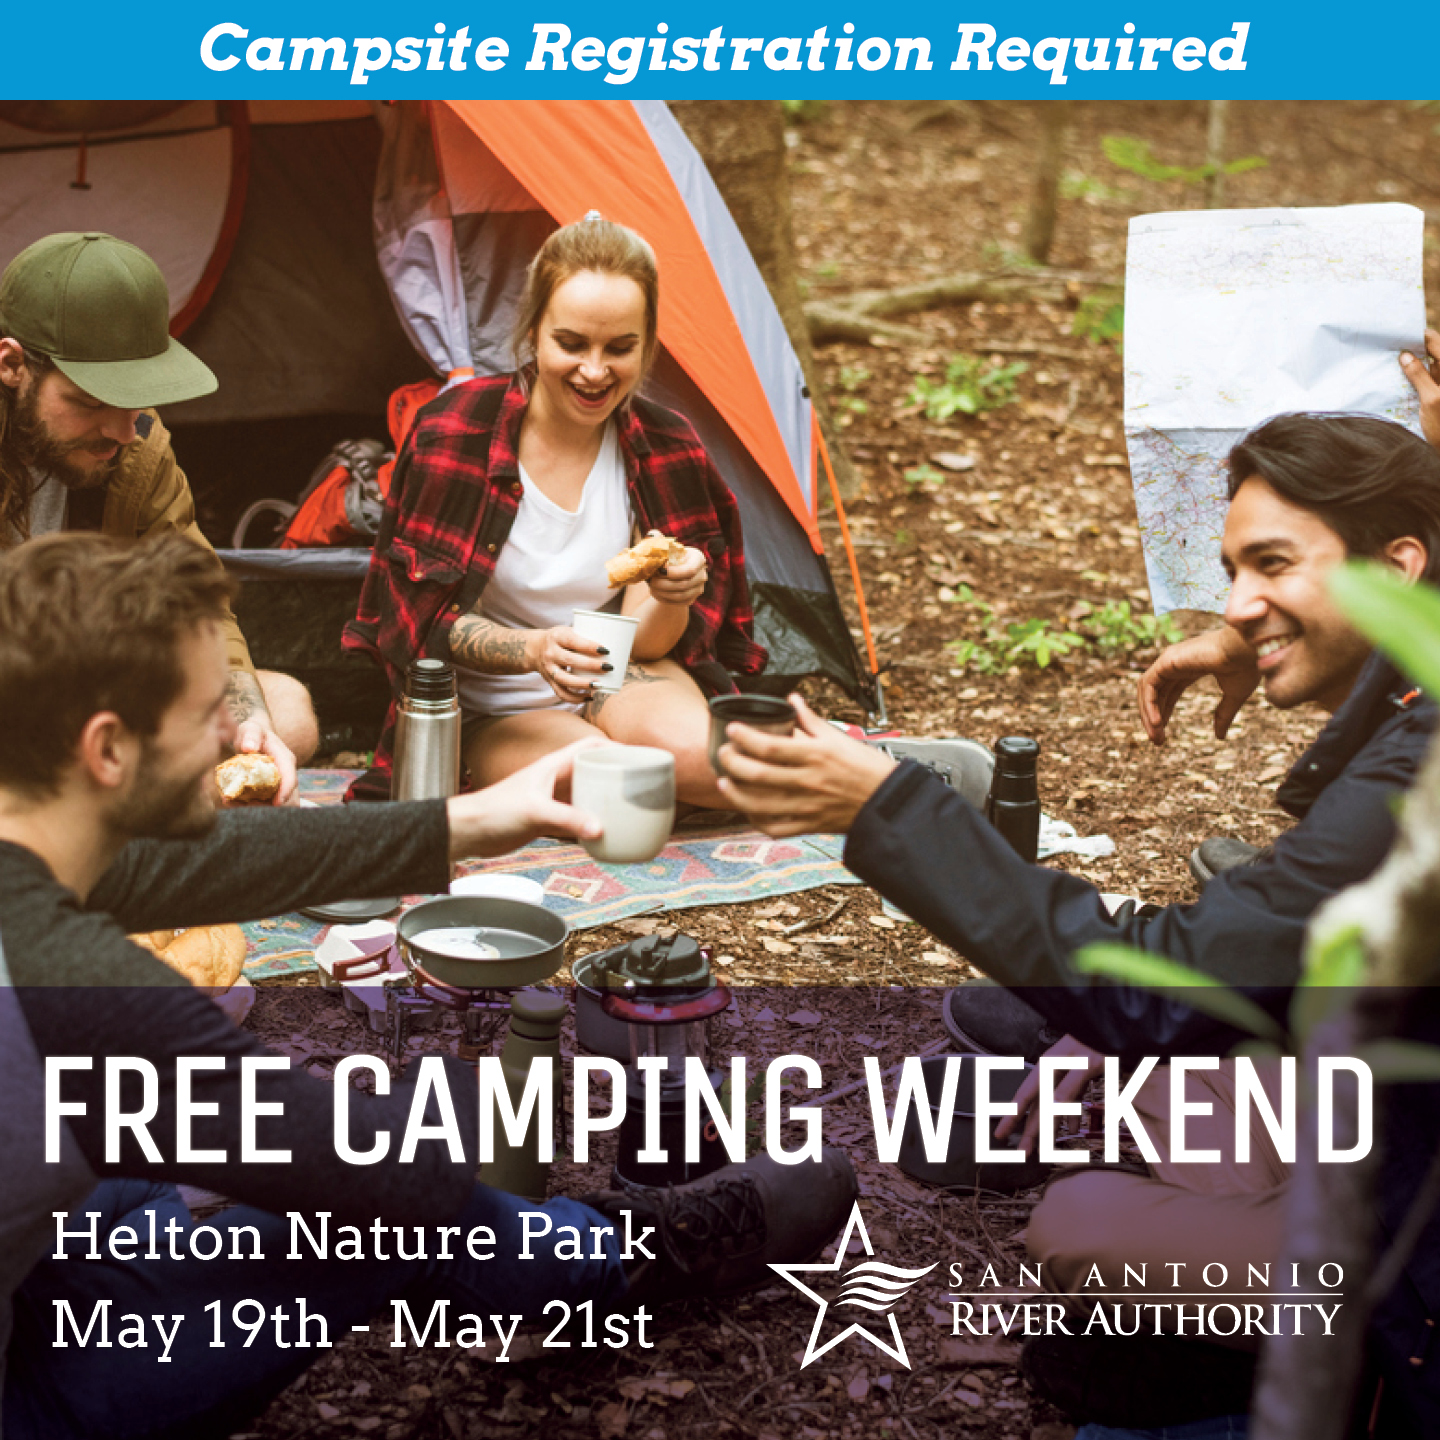 Free Camping Weekend May 19th - May 21st at Helton Nature Park. Campsite Registration Required.